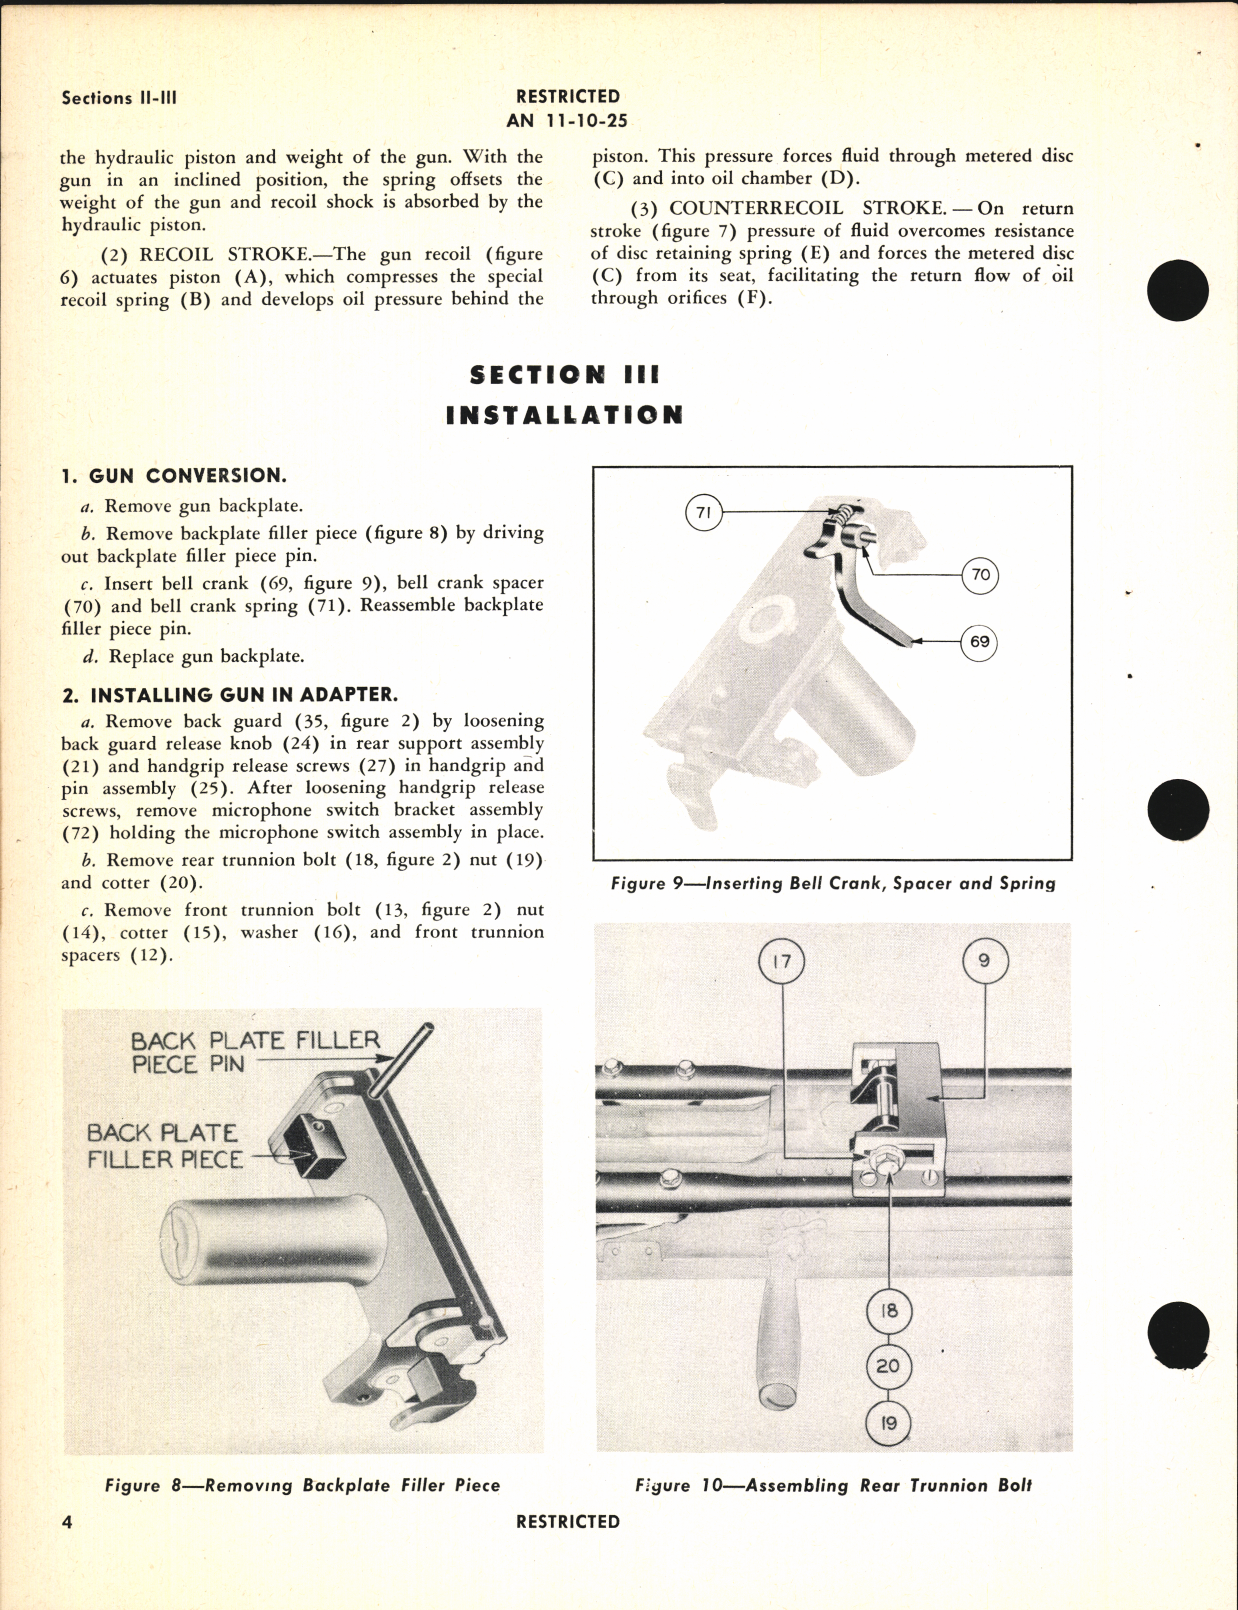 Sample page 8 from AirCorps Library document: Handbook of Instructions with Parts Catalog for Single Adapters for Caliber .50 Machine Guns